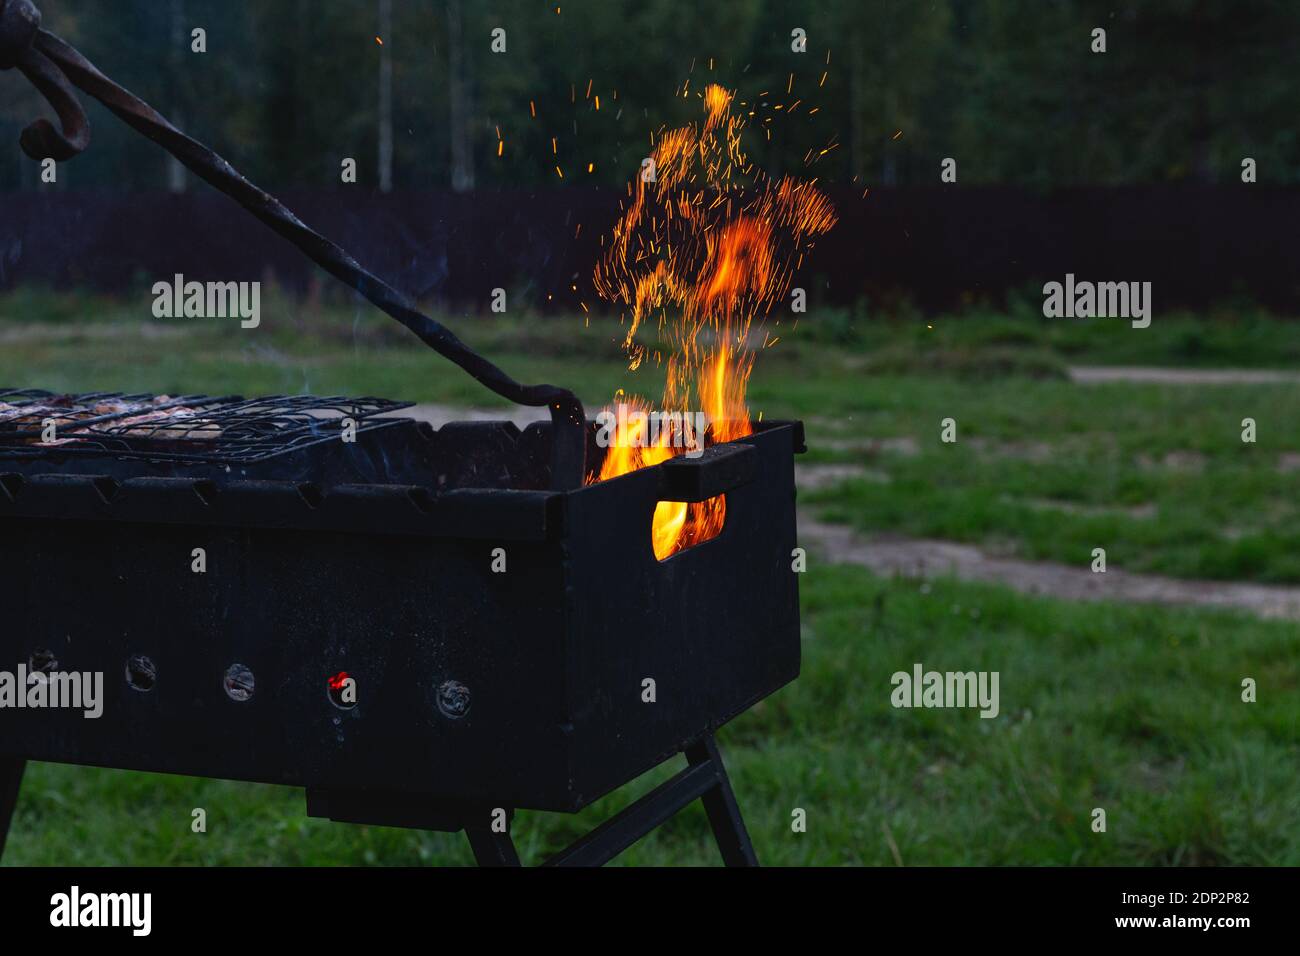 The meat is grilled. A man stirring coals with a hot poker. Sparks fly from the fire in the grill. Outdoor cooking. Meeting with friends, picnic Stock Photo